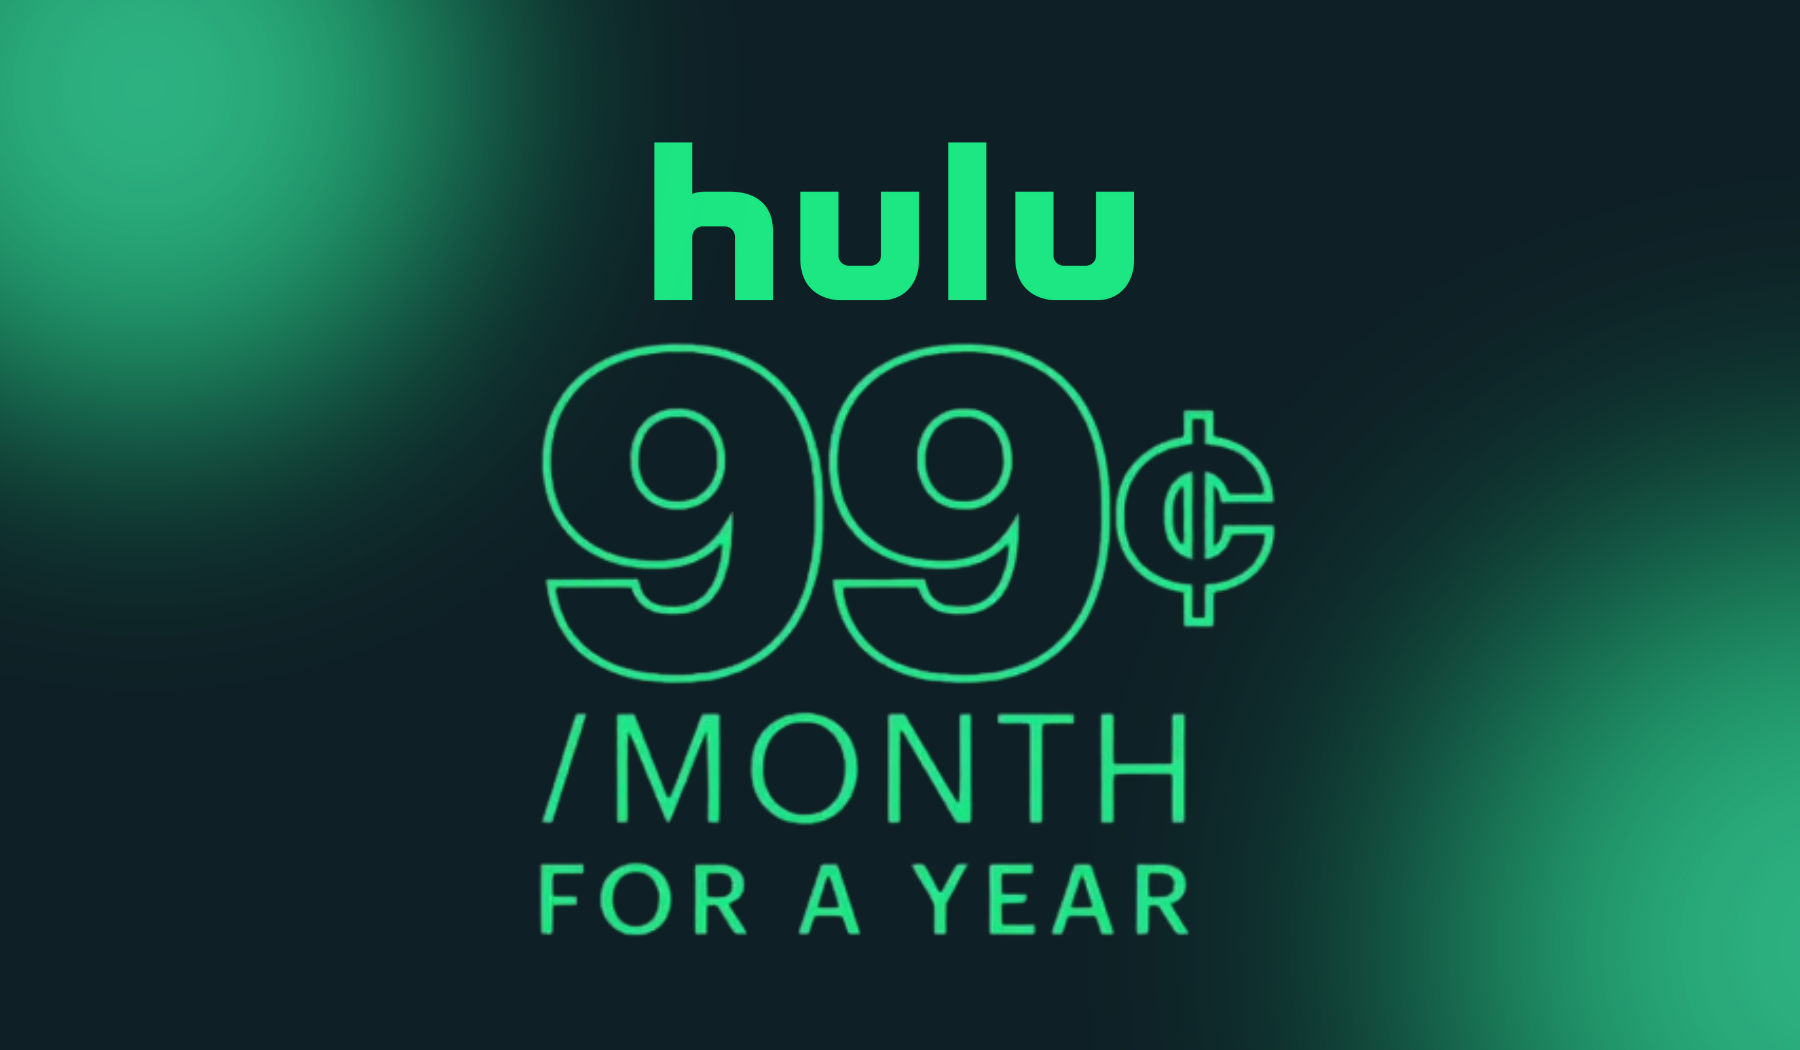 Hulu logo and $ 0.99 cent advertisement on black and green backdrop